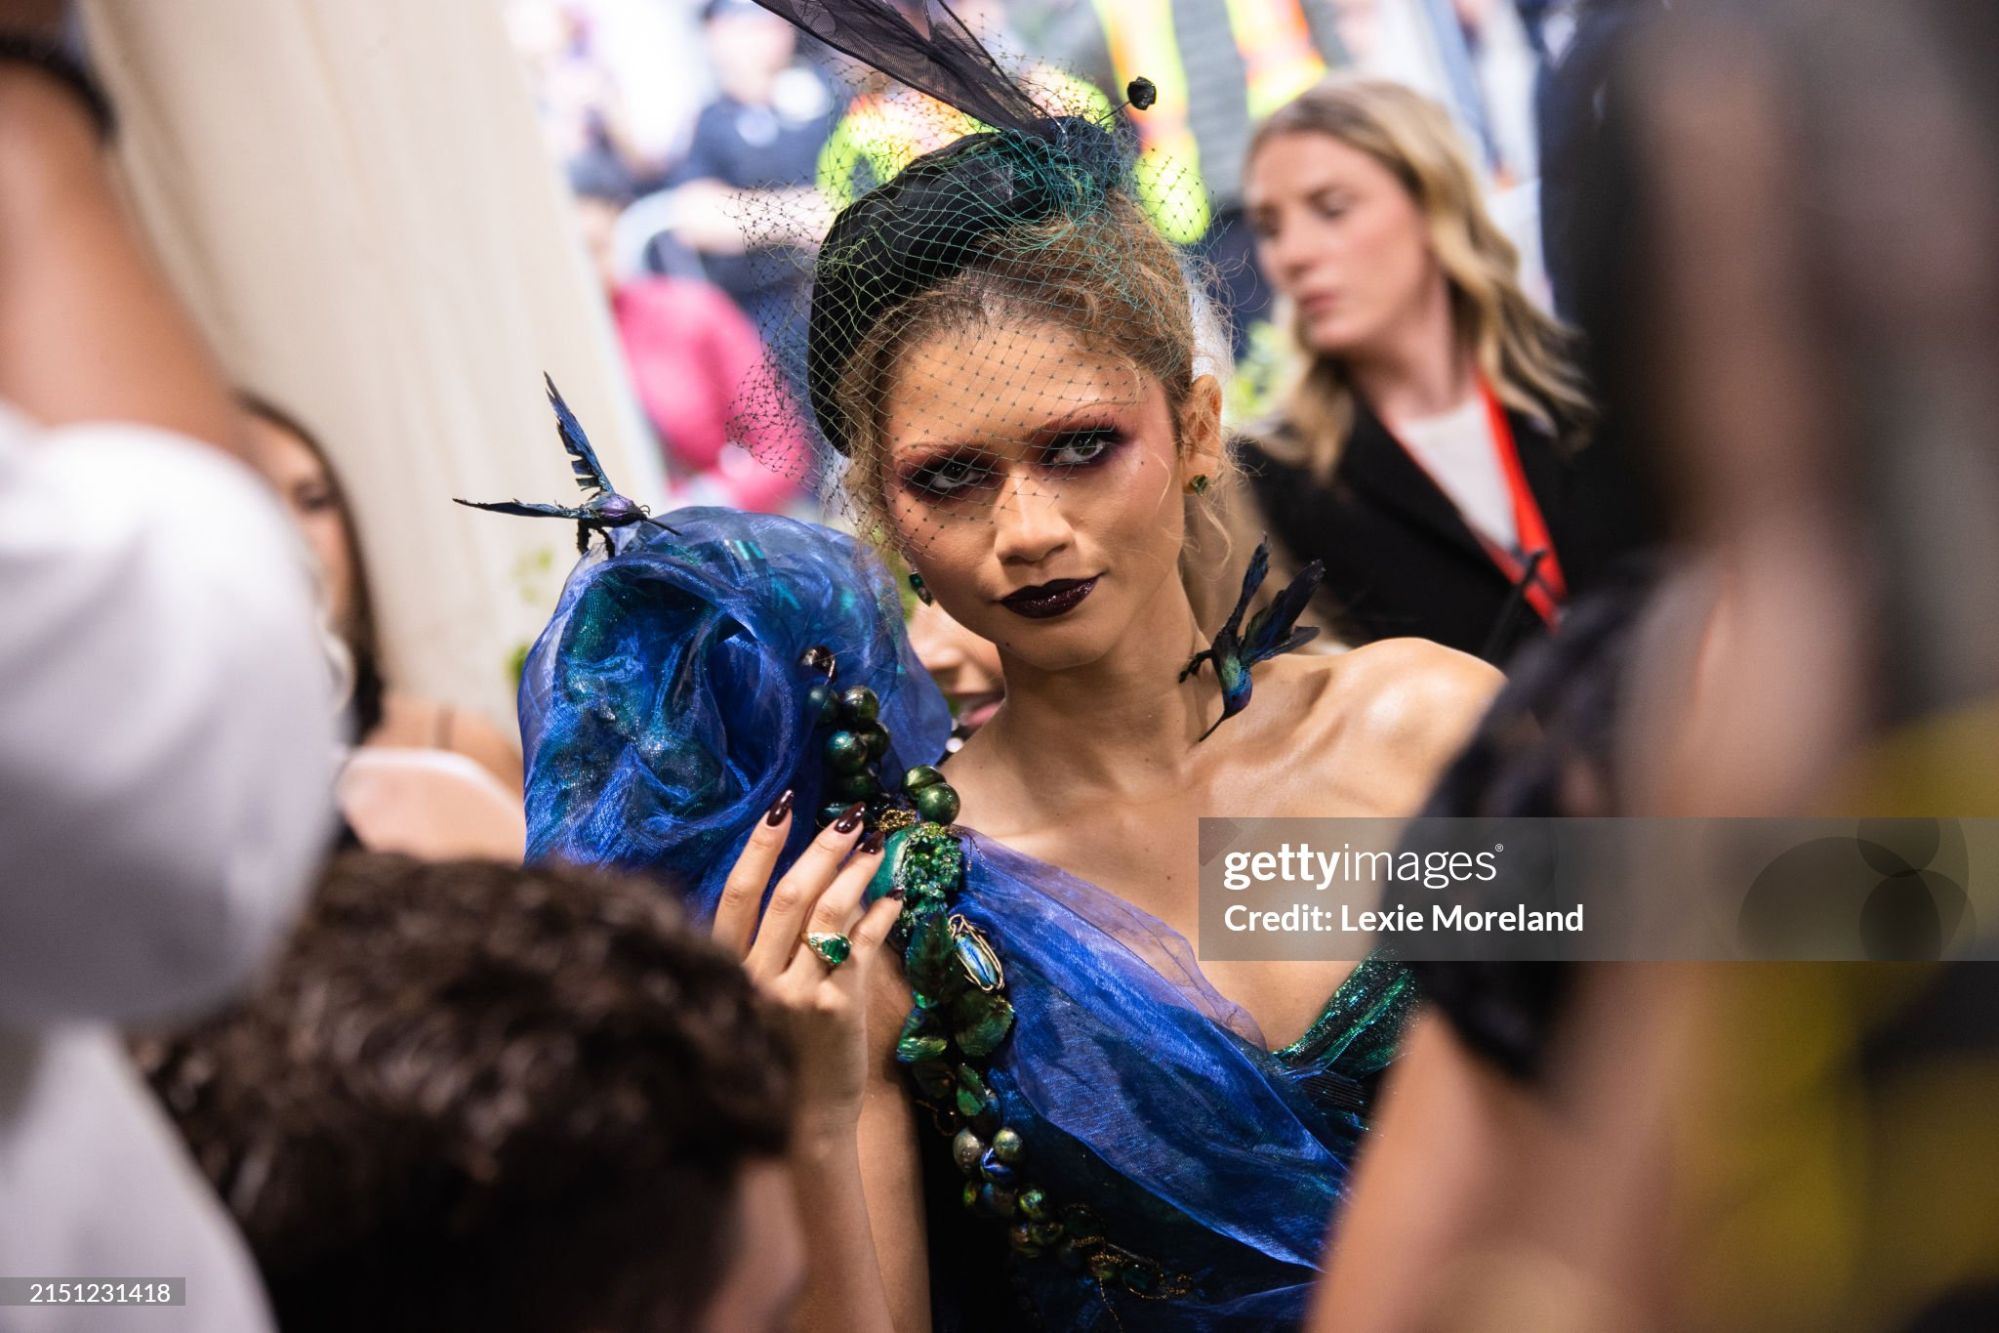 gettyimages-2151231418-2048x2048.jpg